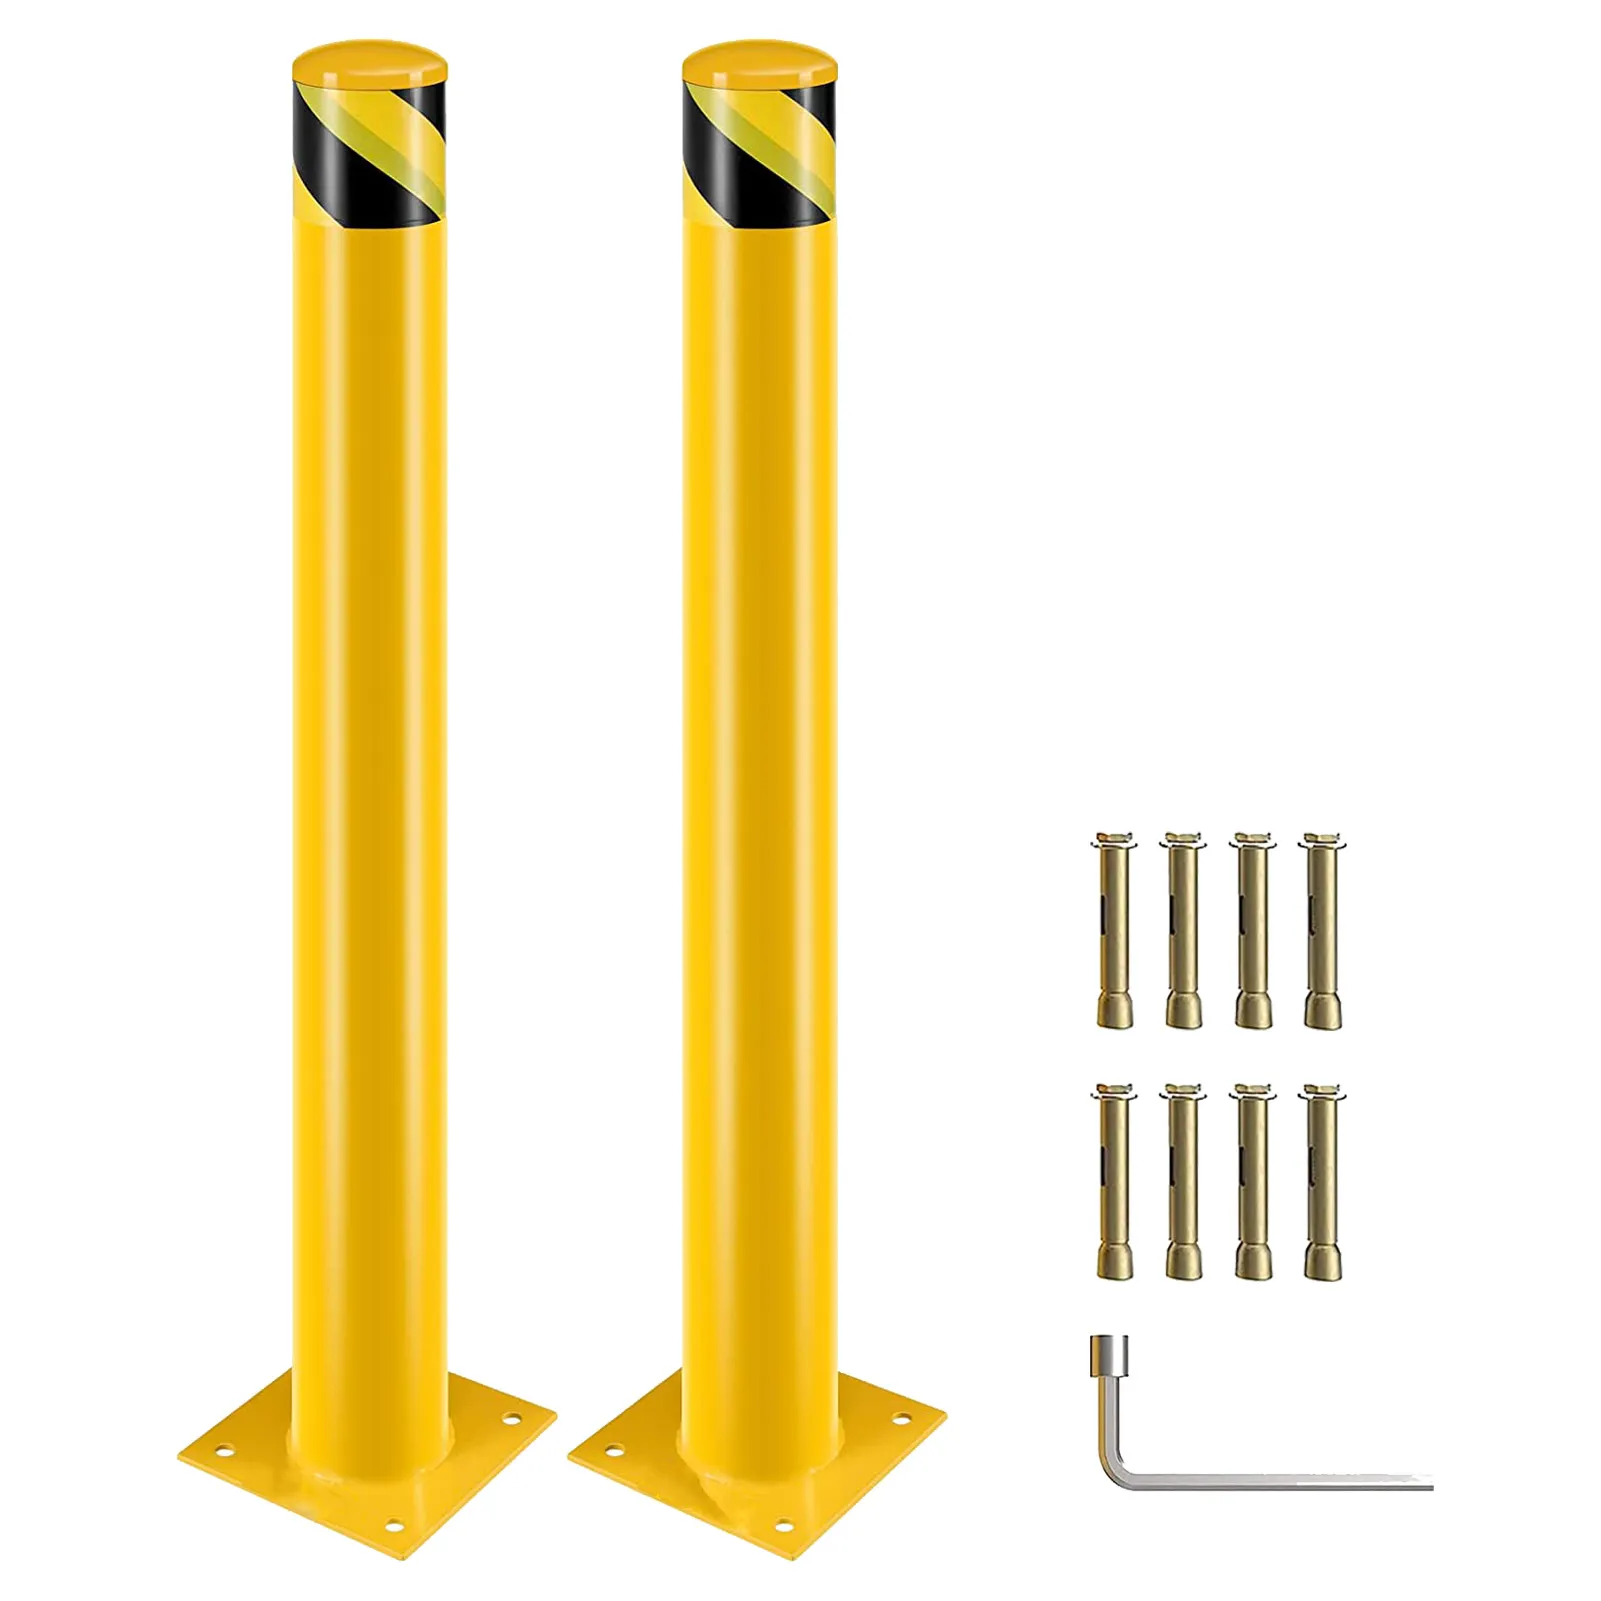 48inch Height Bollard Post, Yellow Powder Coated Safety Parking Barrier Post with 4 Anchor Bolts, Steel Safety Pipe Bollards for High Traffic Areas